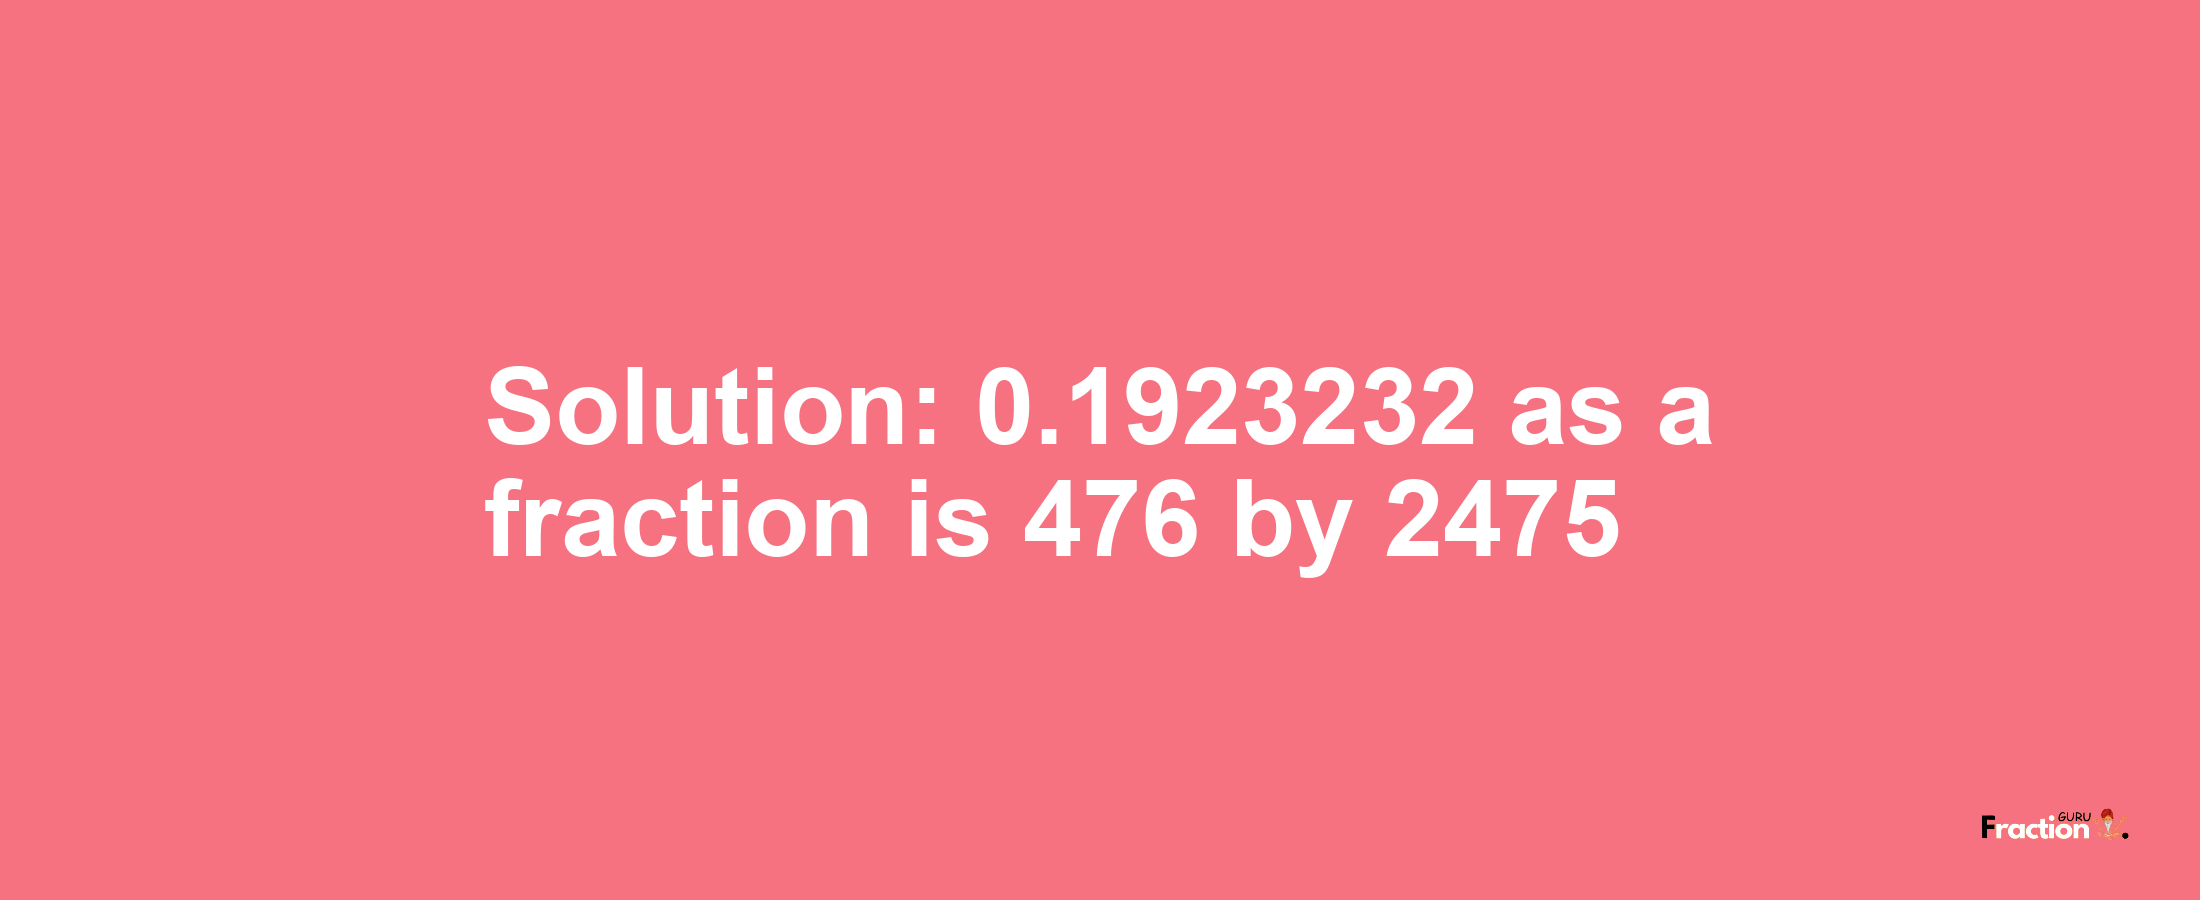 Solution:0.1923232 as a fraction is 476/2475